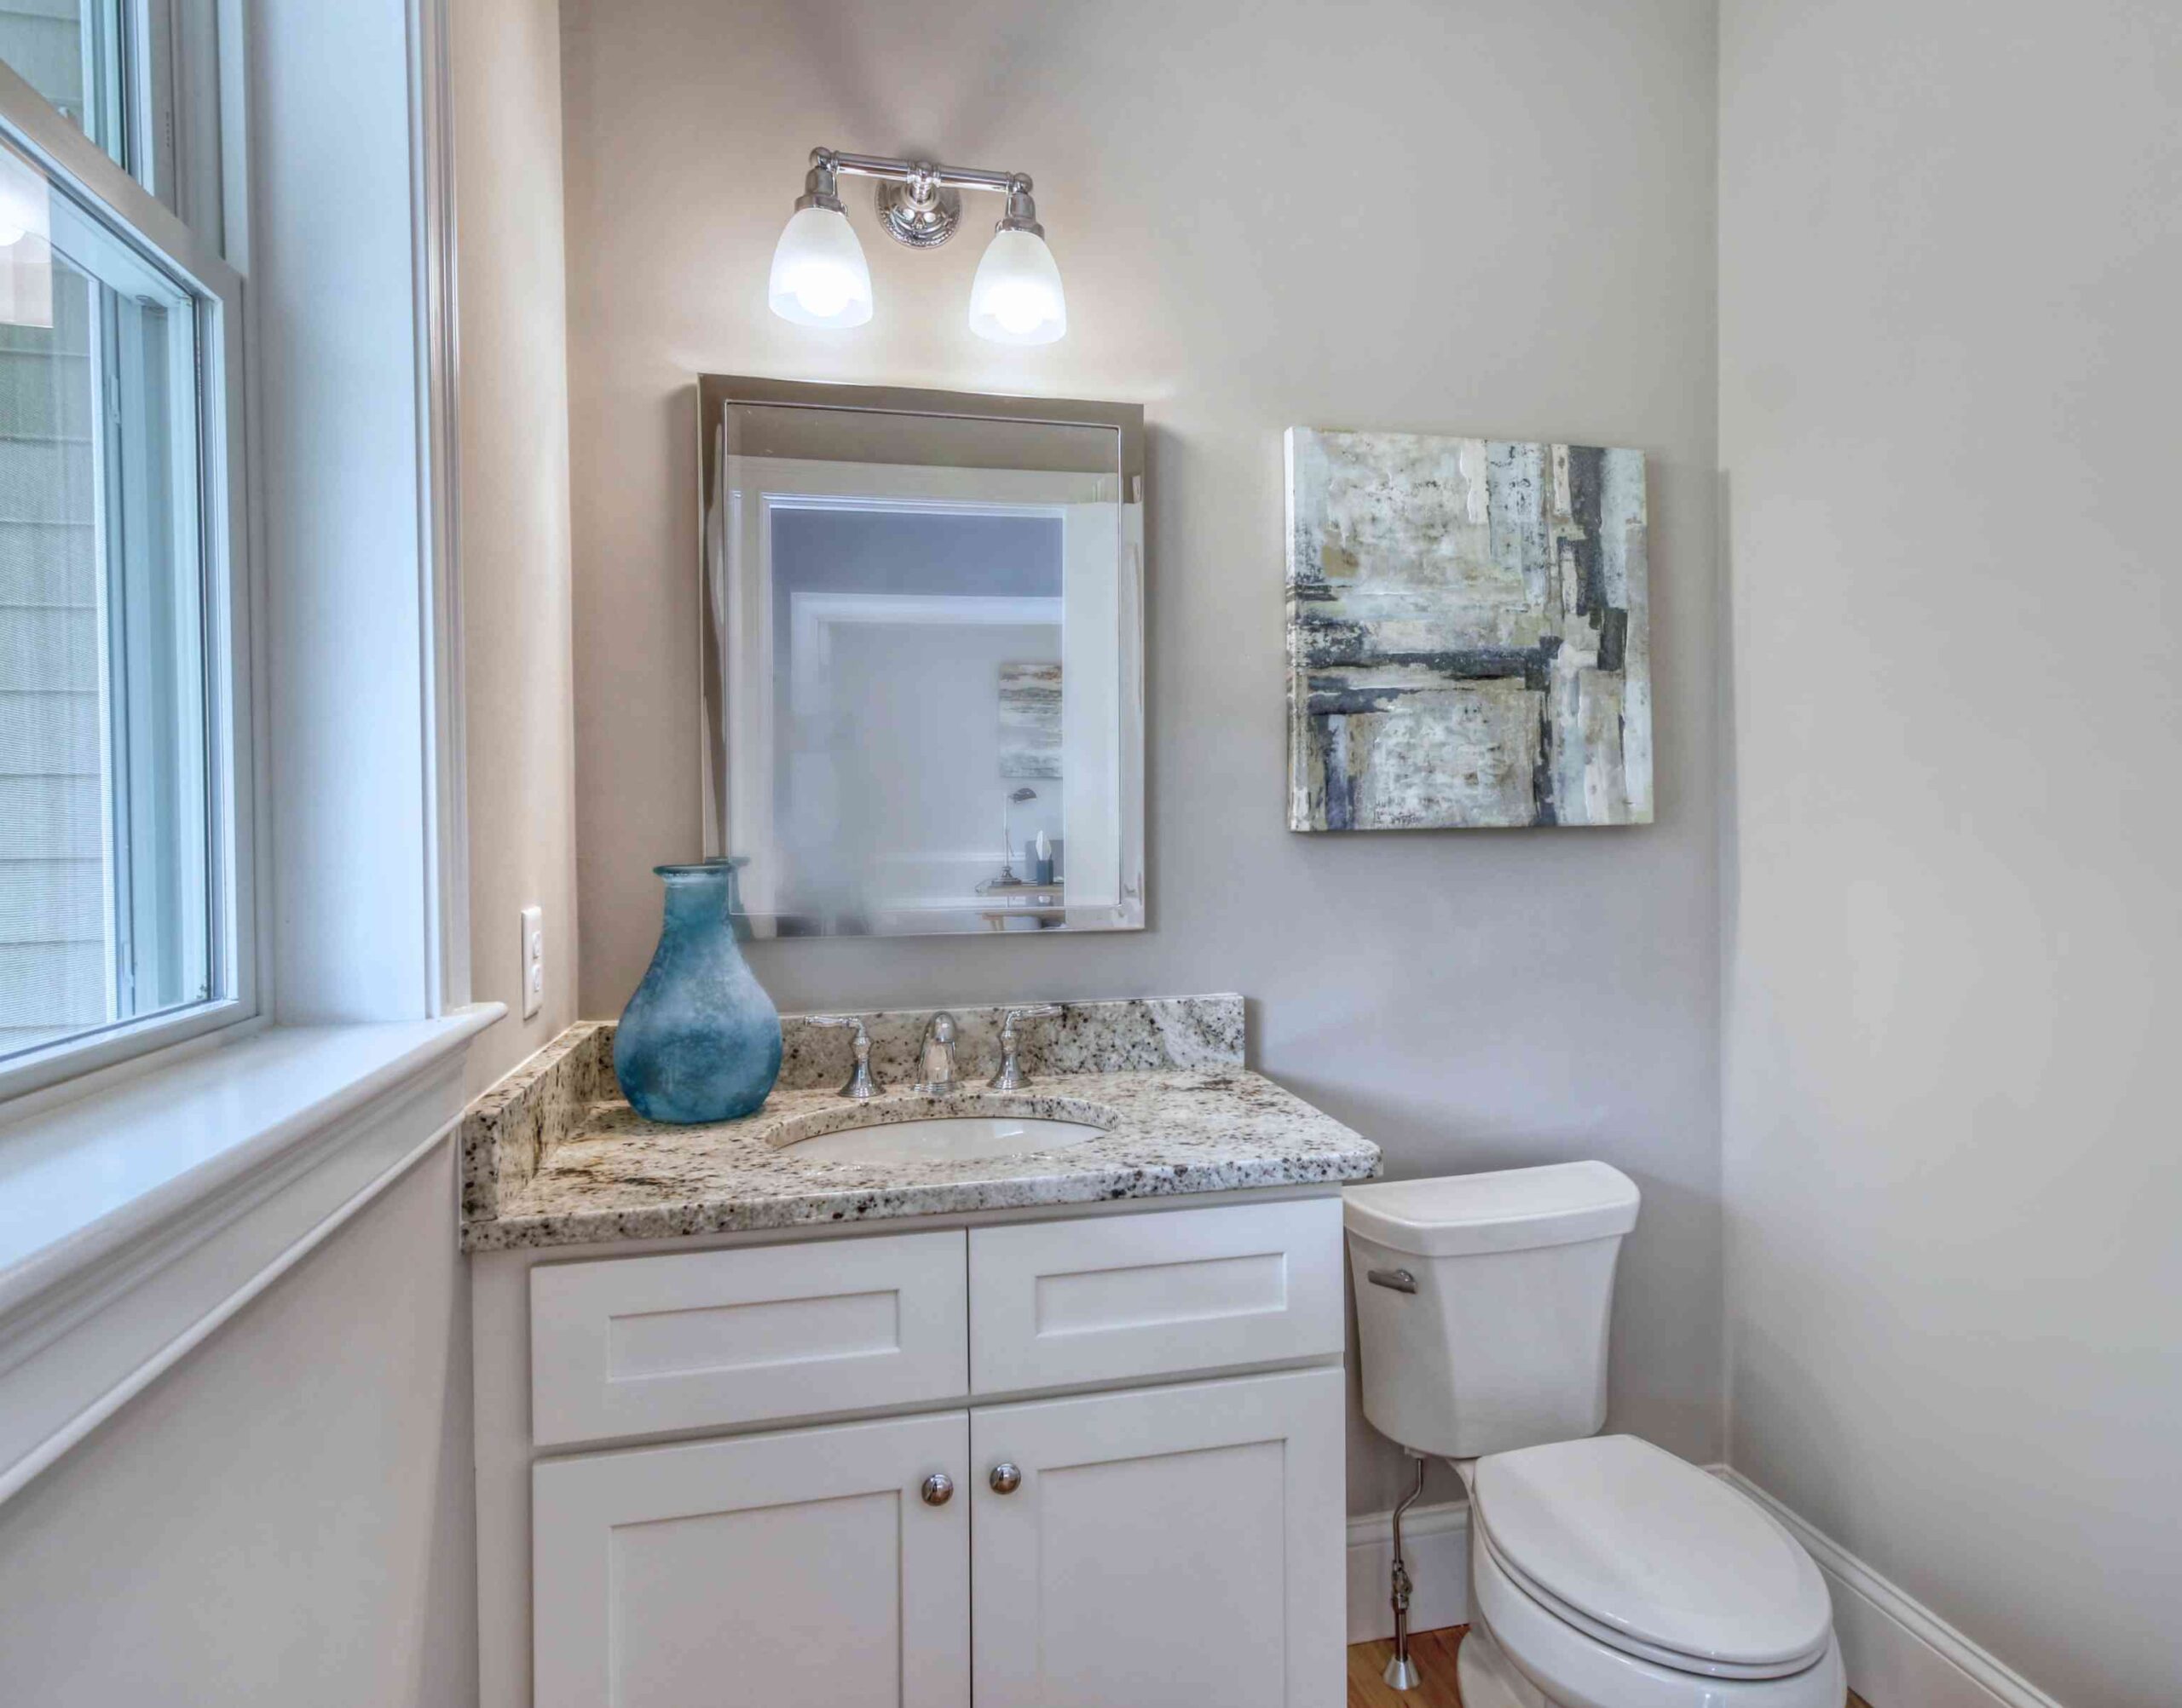 Light grey bathroom walls with a white toilet and sink cabinetry